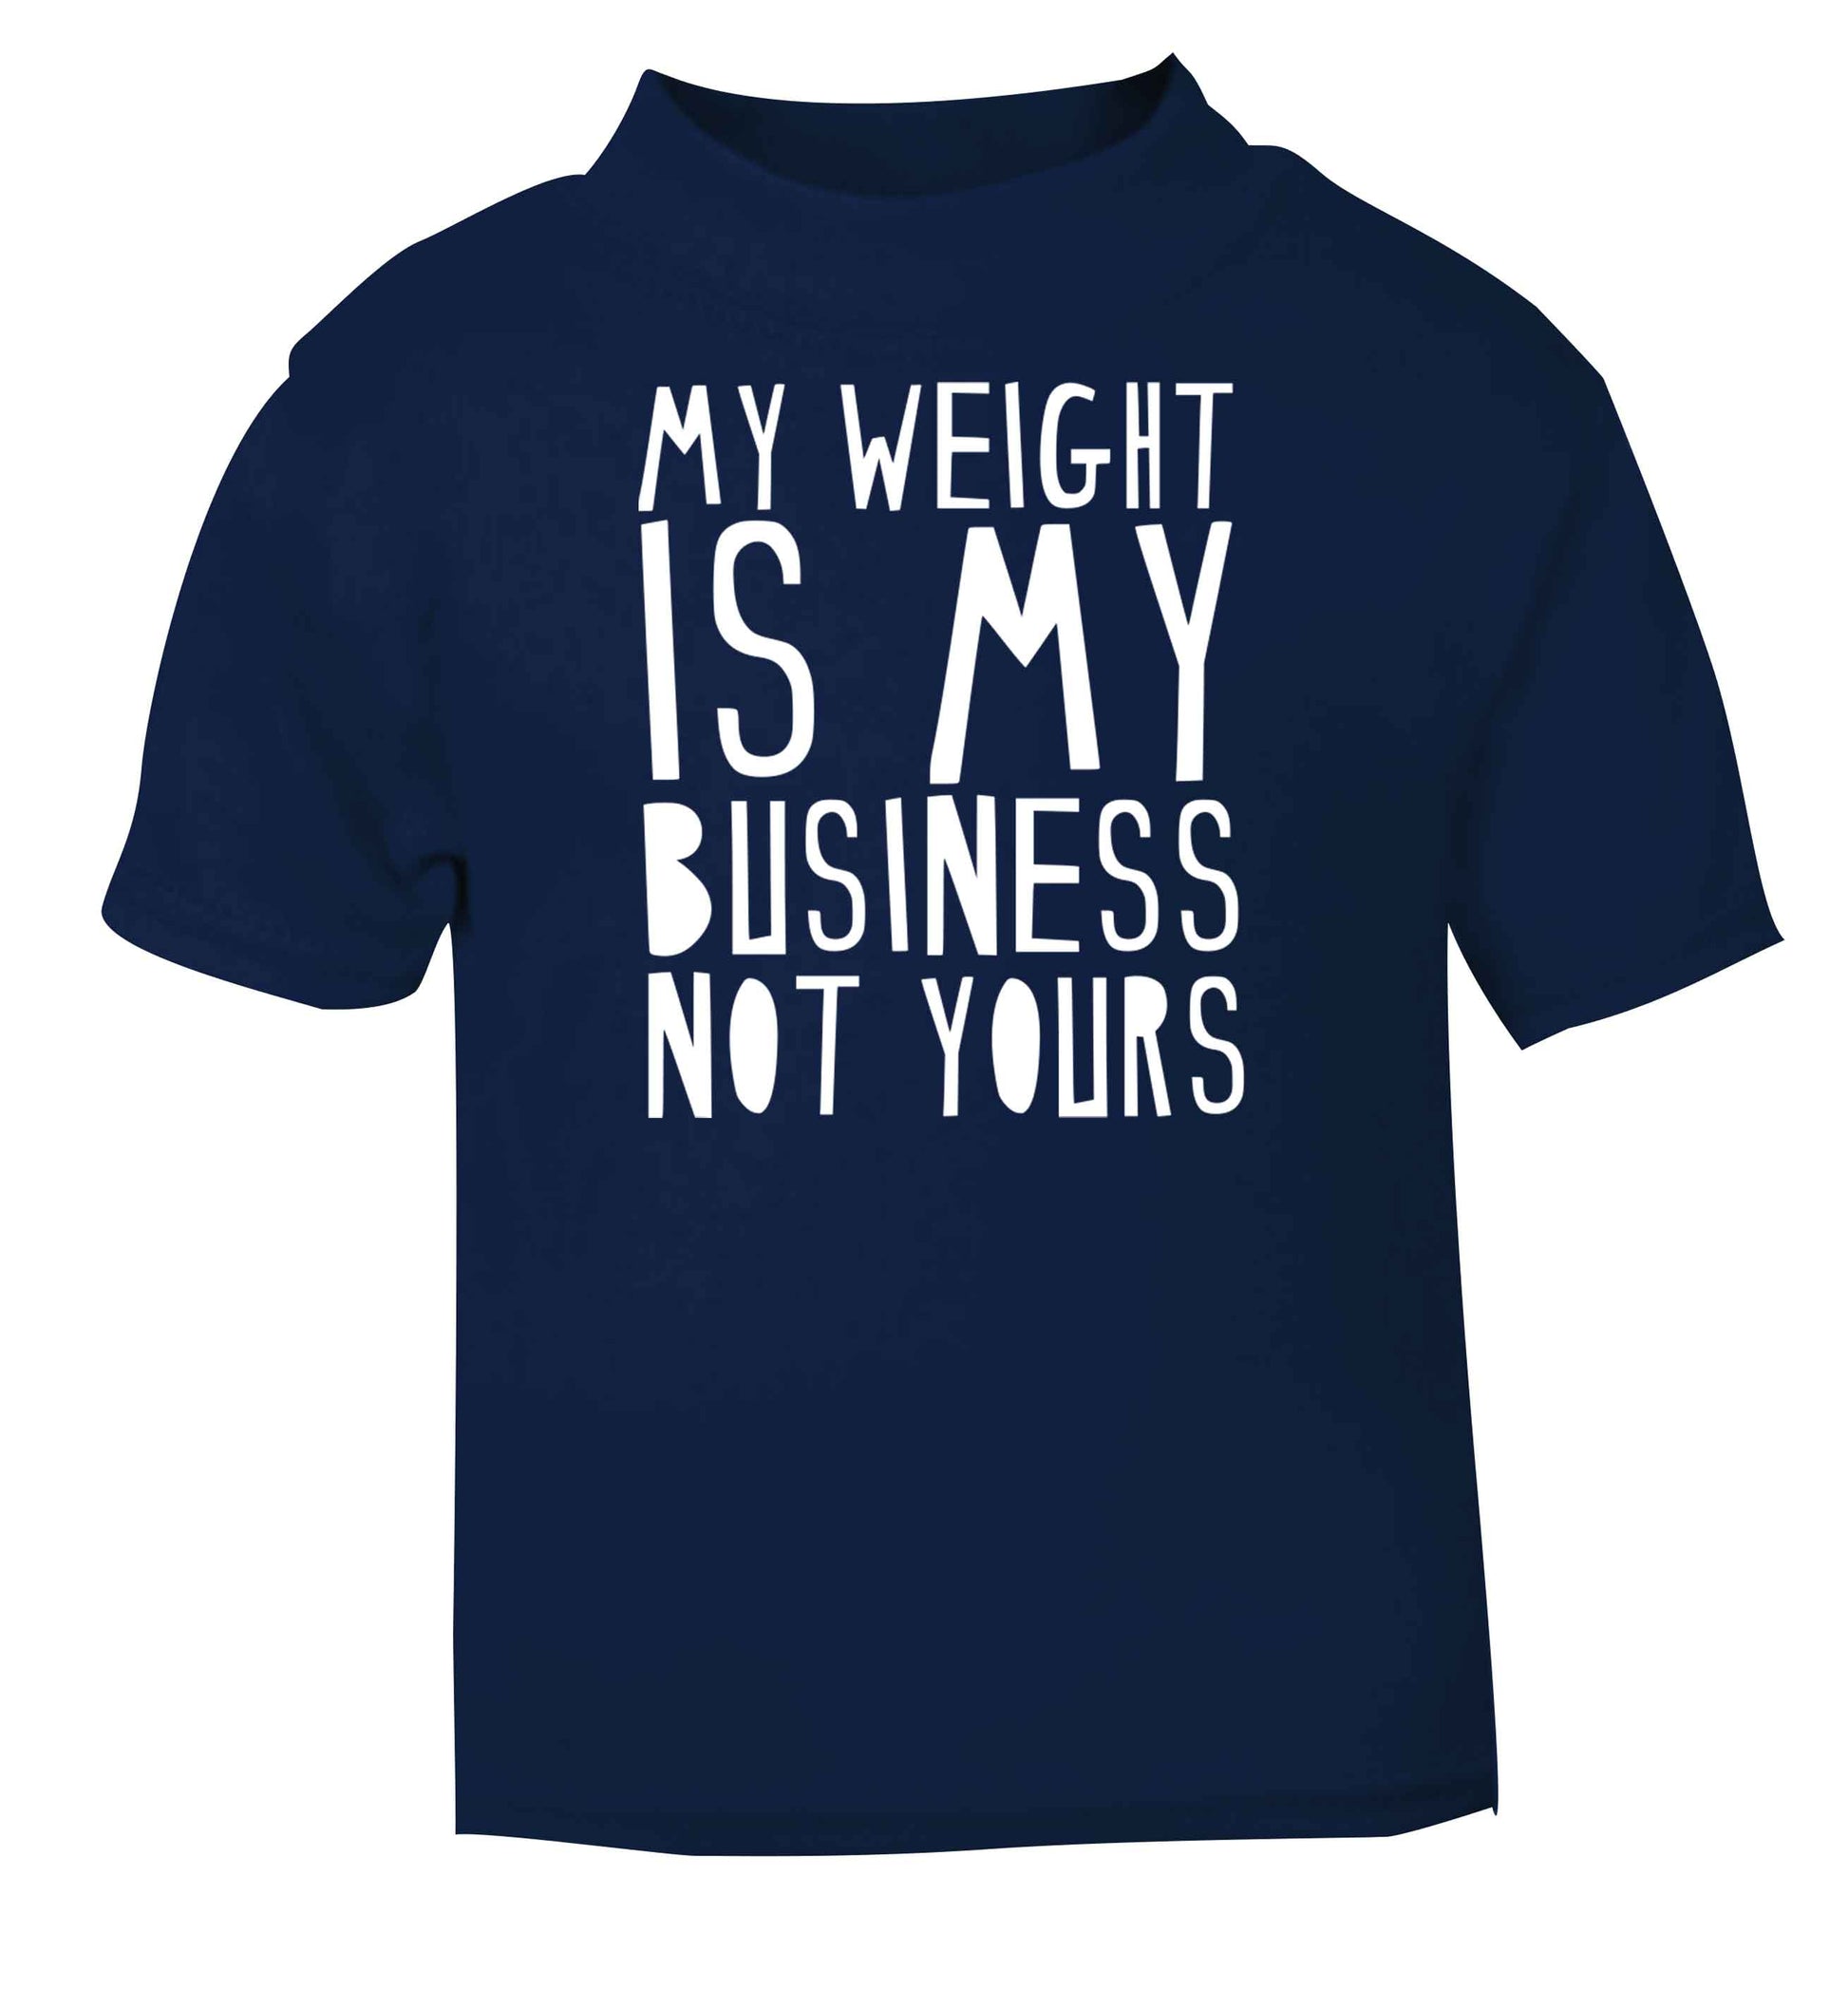 My weight is my business not yours navy baby toddler Tshirt 2 Years